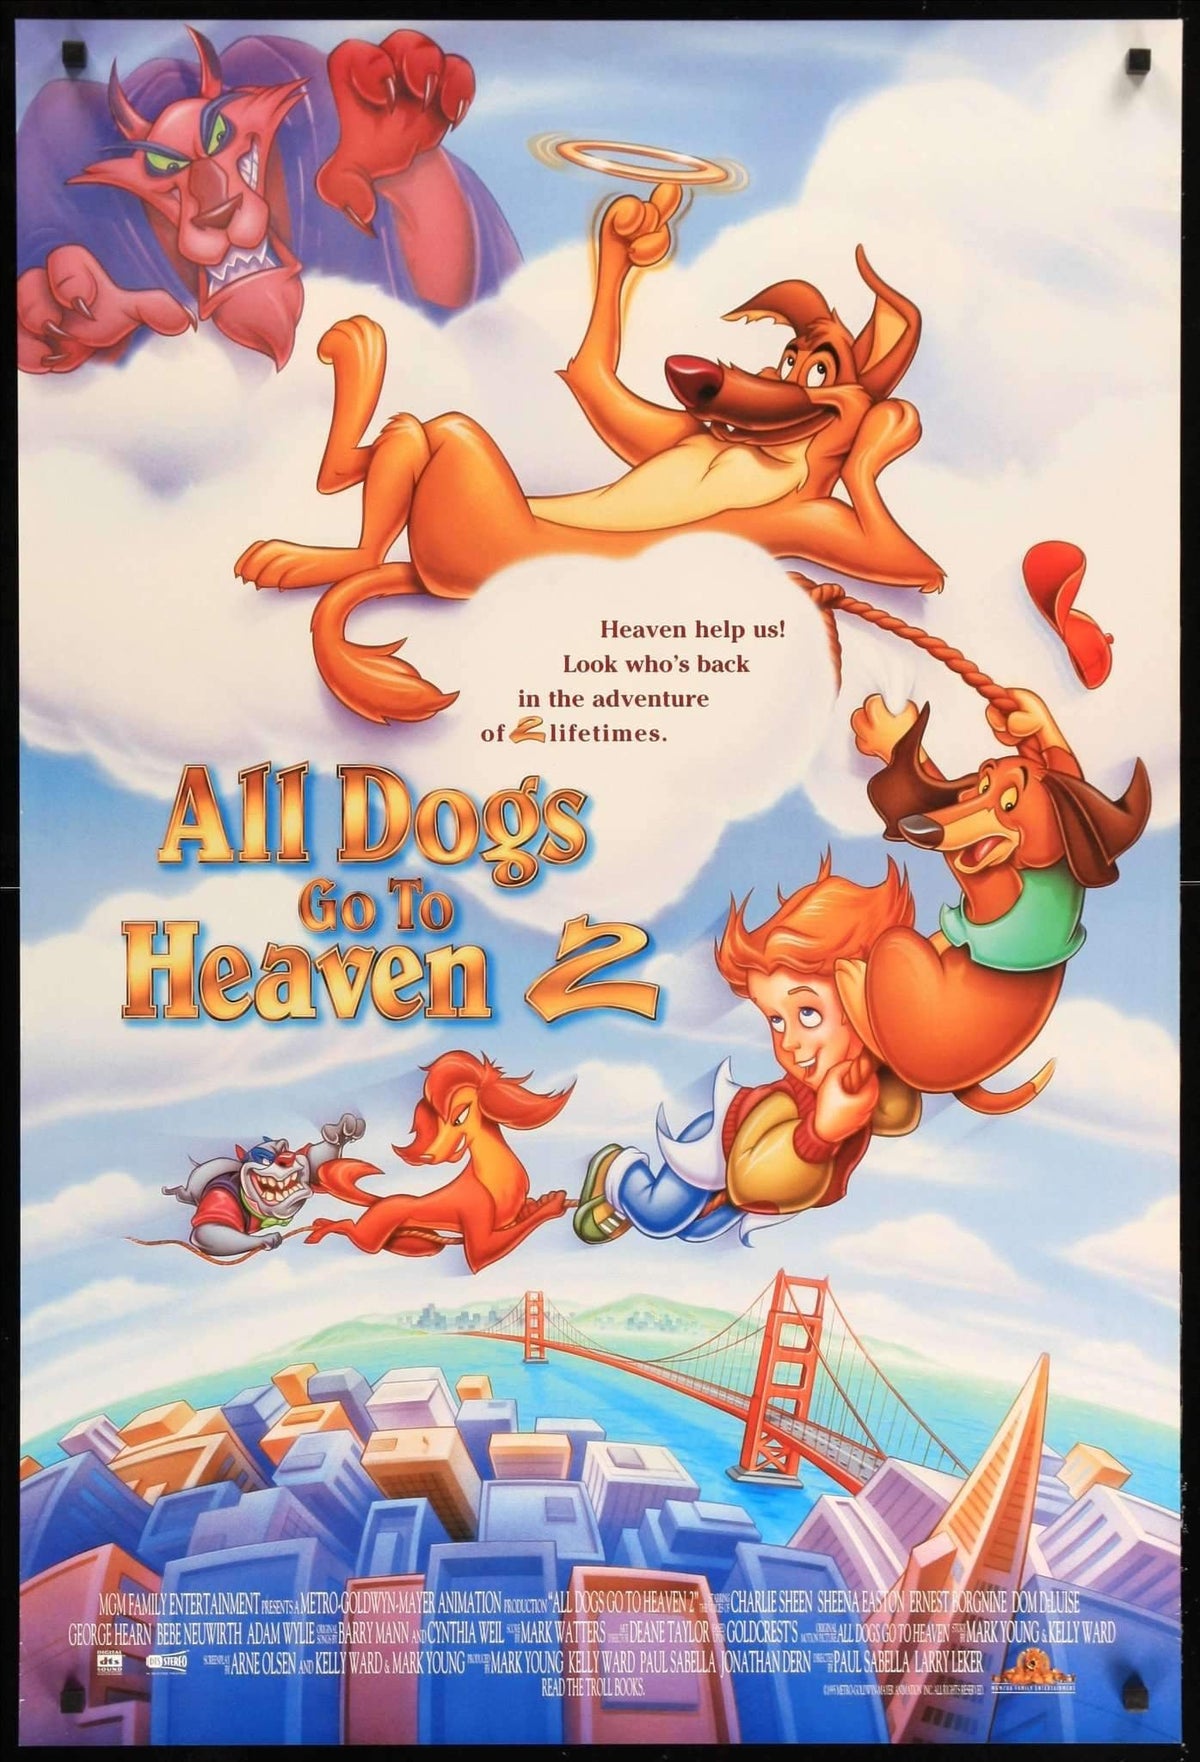 All Dogs Go to Heaven 2 (1996) original movie poster for sale at Original Film Art